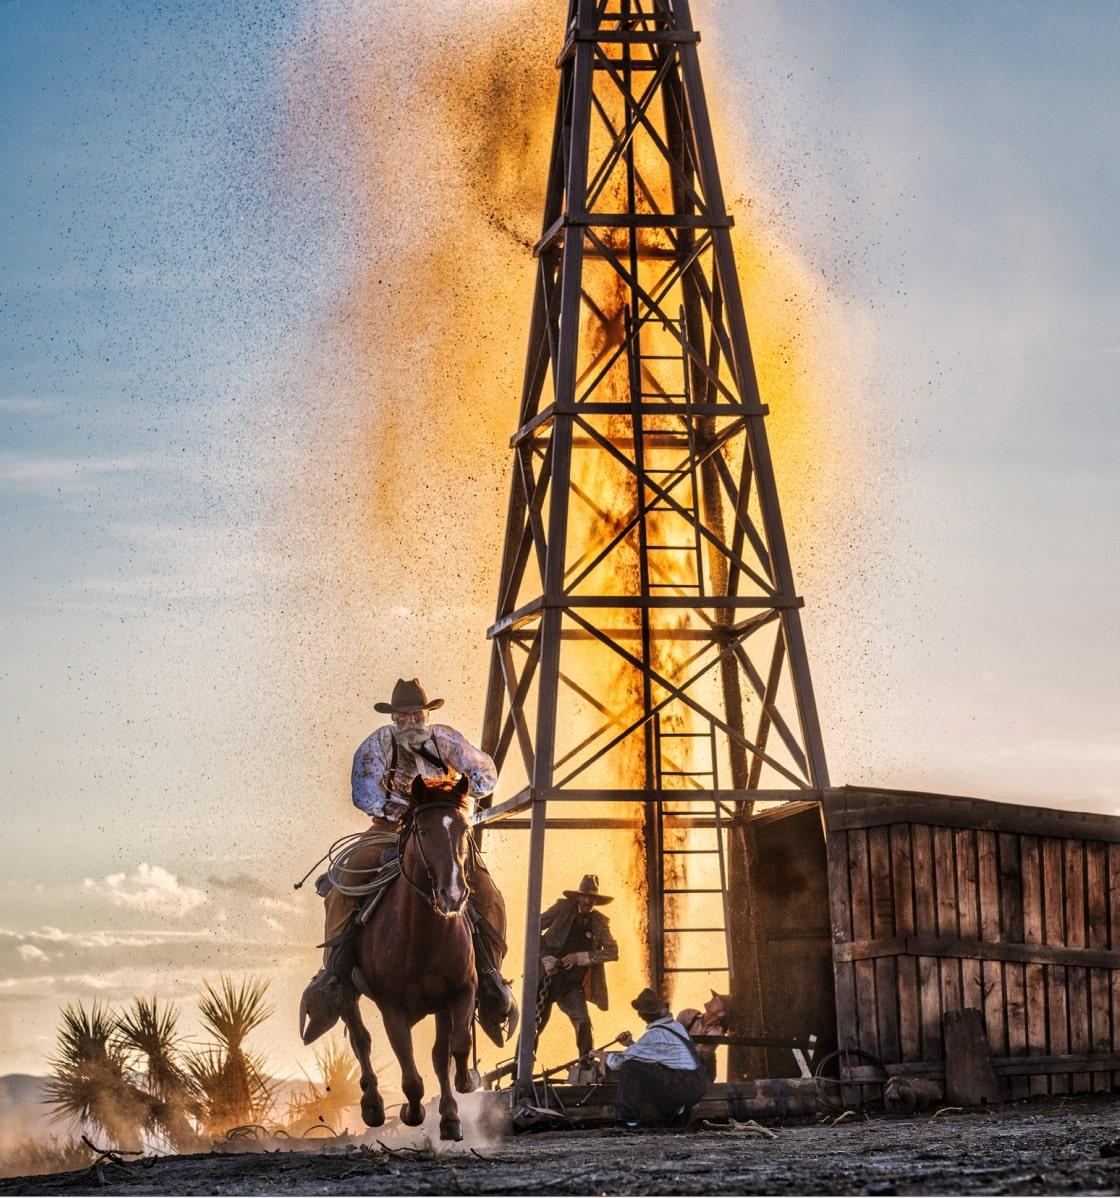 David Yarrow Figurative Photograph - The golden age of Oil - cowboy in front of oil derrick, fine art photography